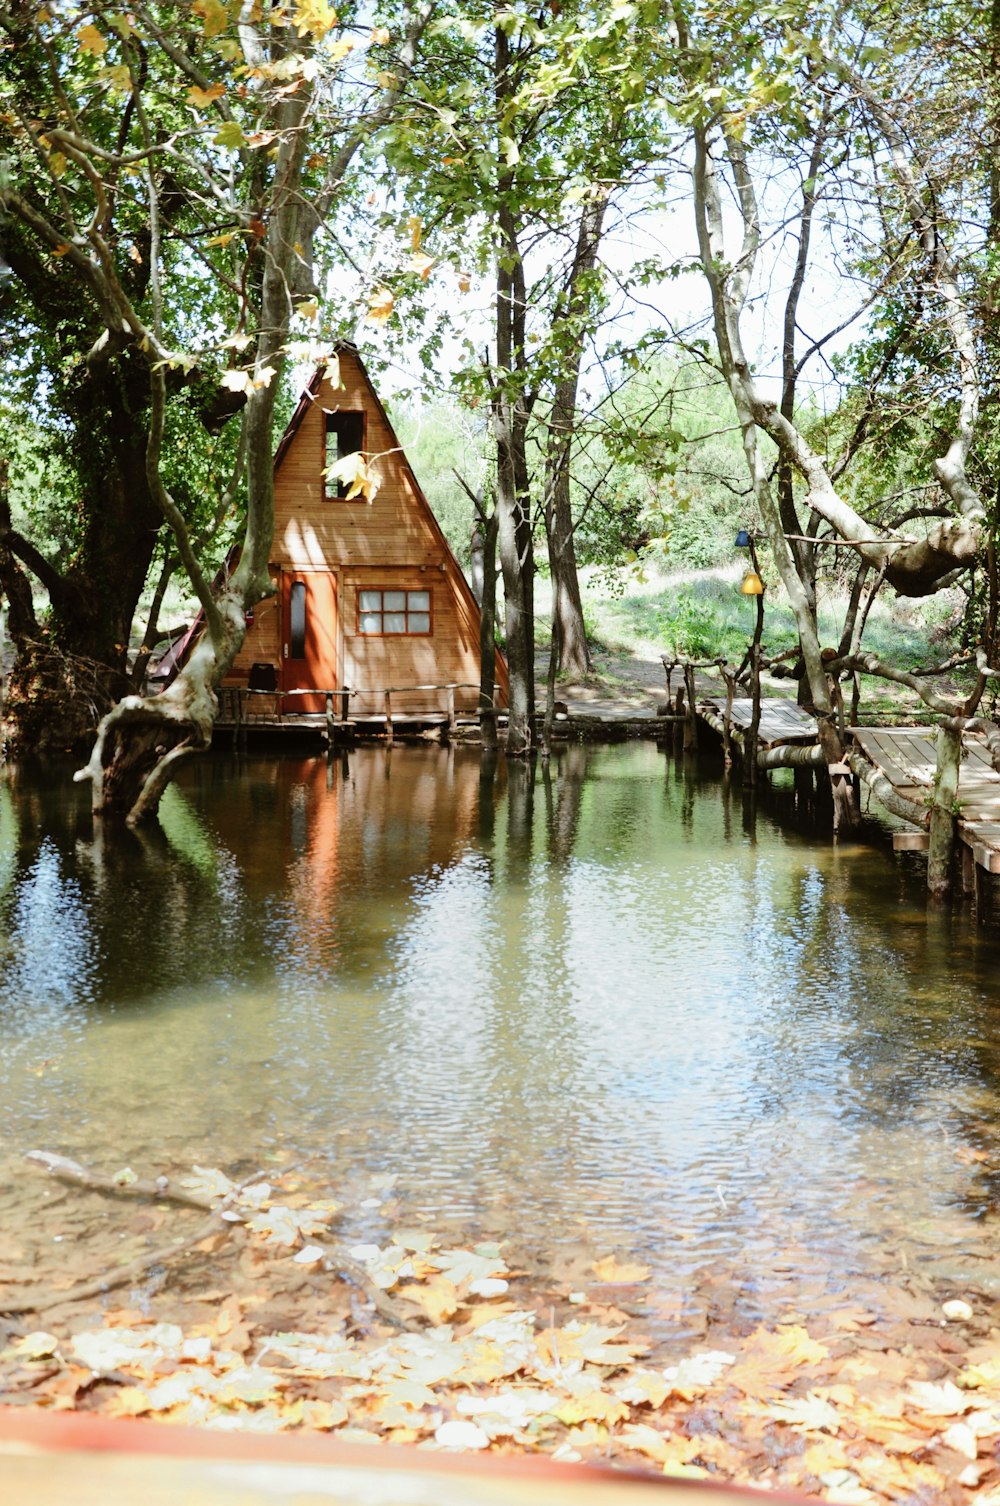 brown wooden house on river bank during daytime